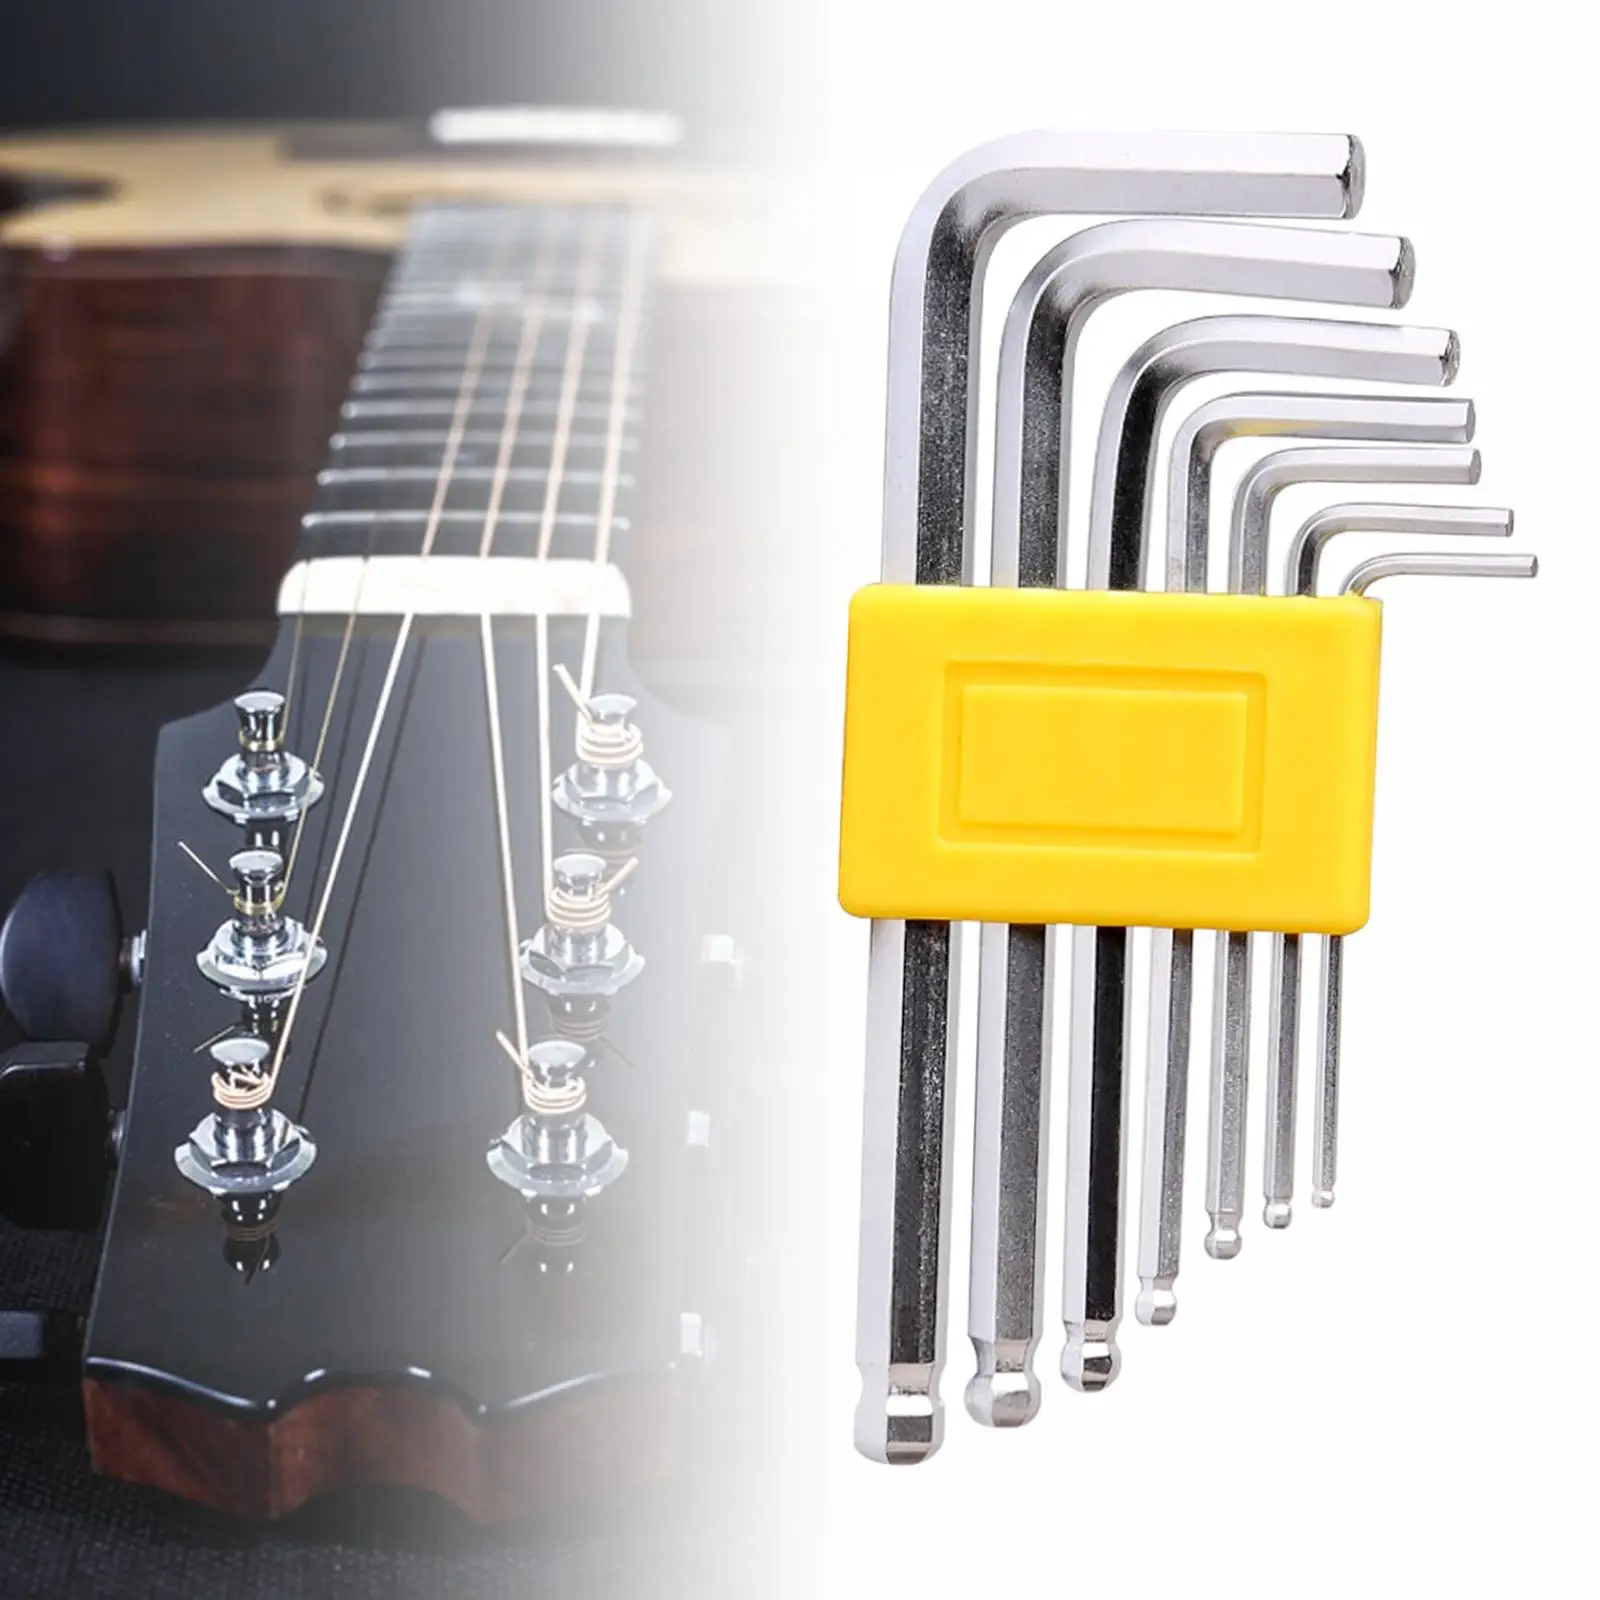 

7x Guitar Wrench Accessories Replaces Guitar Tool Convenient 1.5mm 2mm 2.5mm 3mm 4mm 5mm 6mm for Electric Guitar Bass